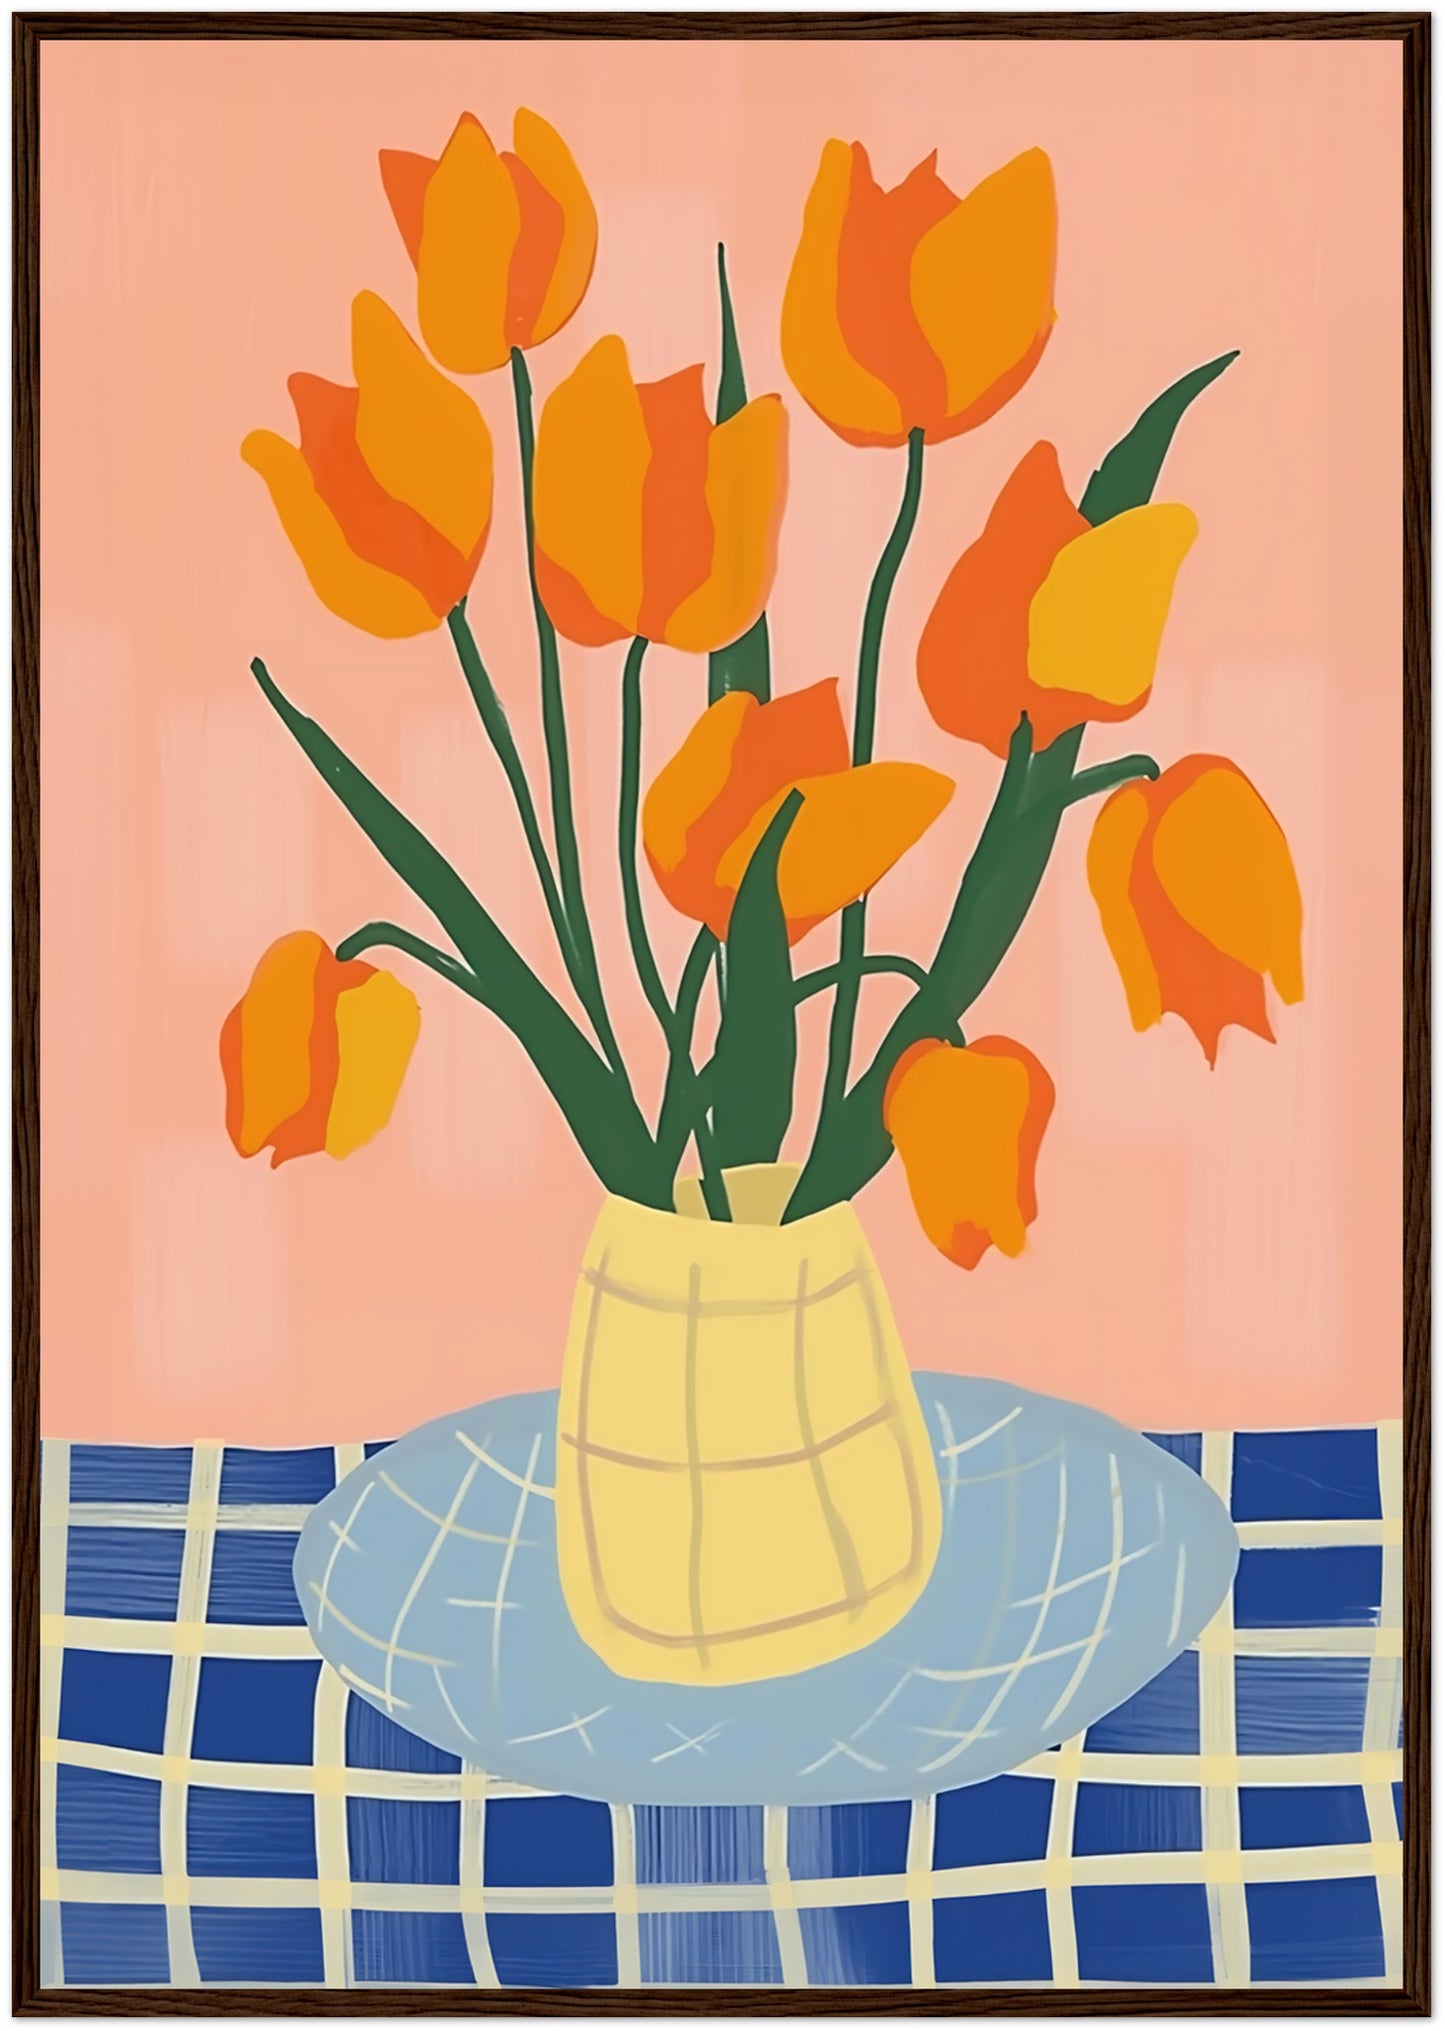 Stylized painting of orange tulips in a yellow vase on a blue checkered table.